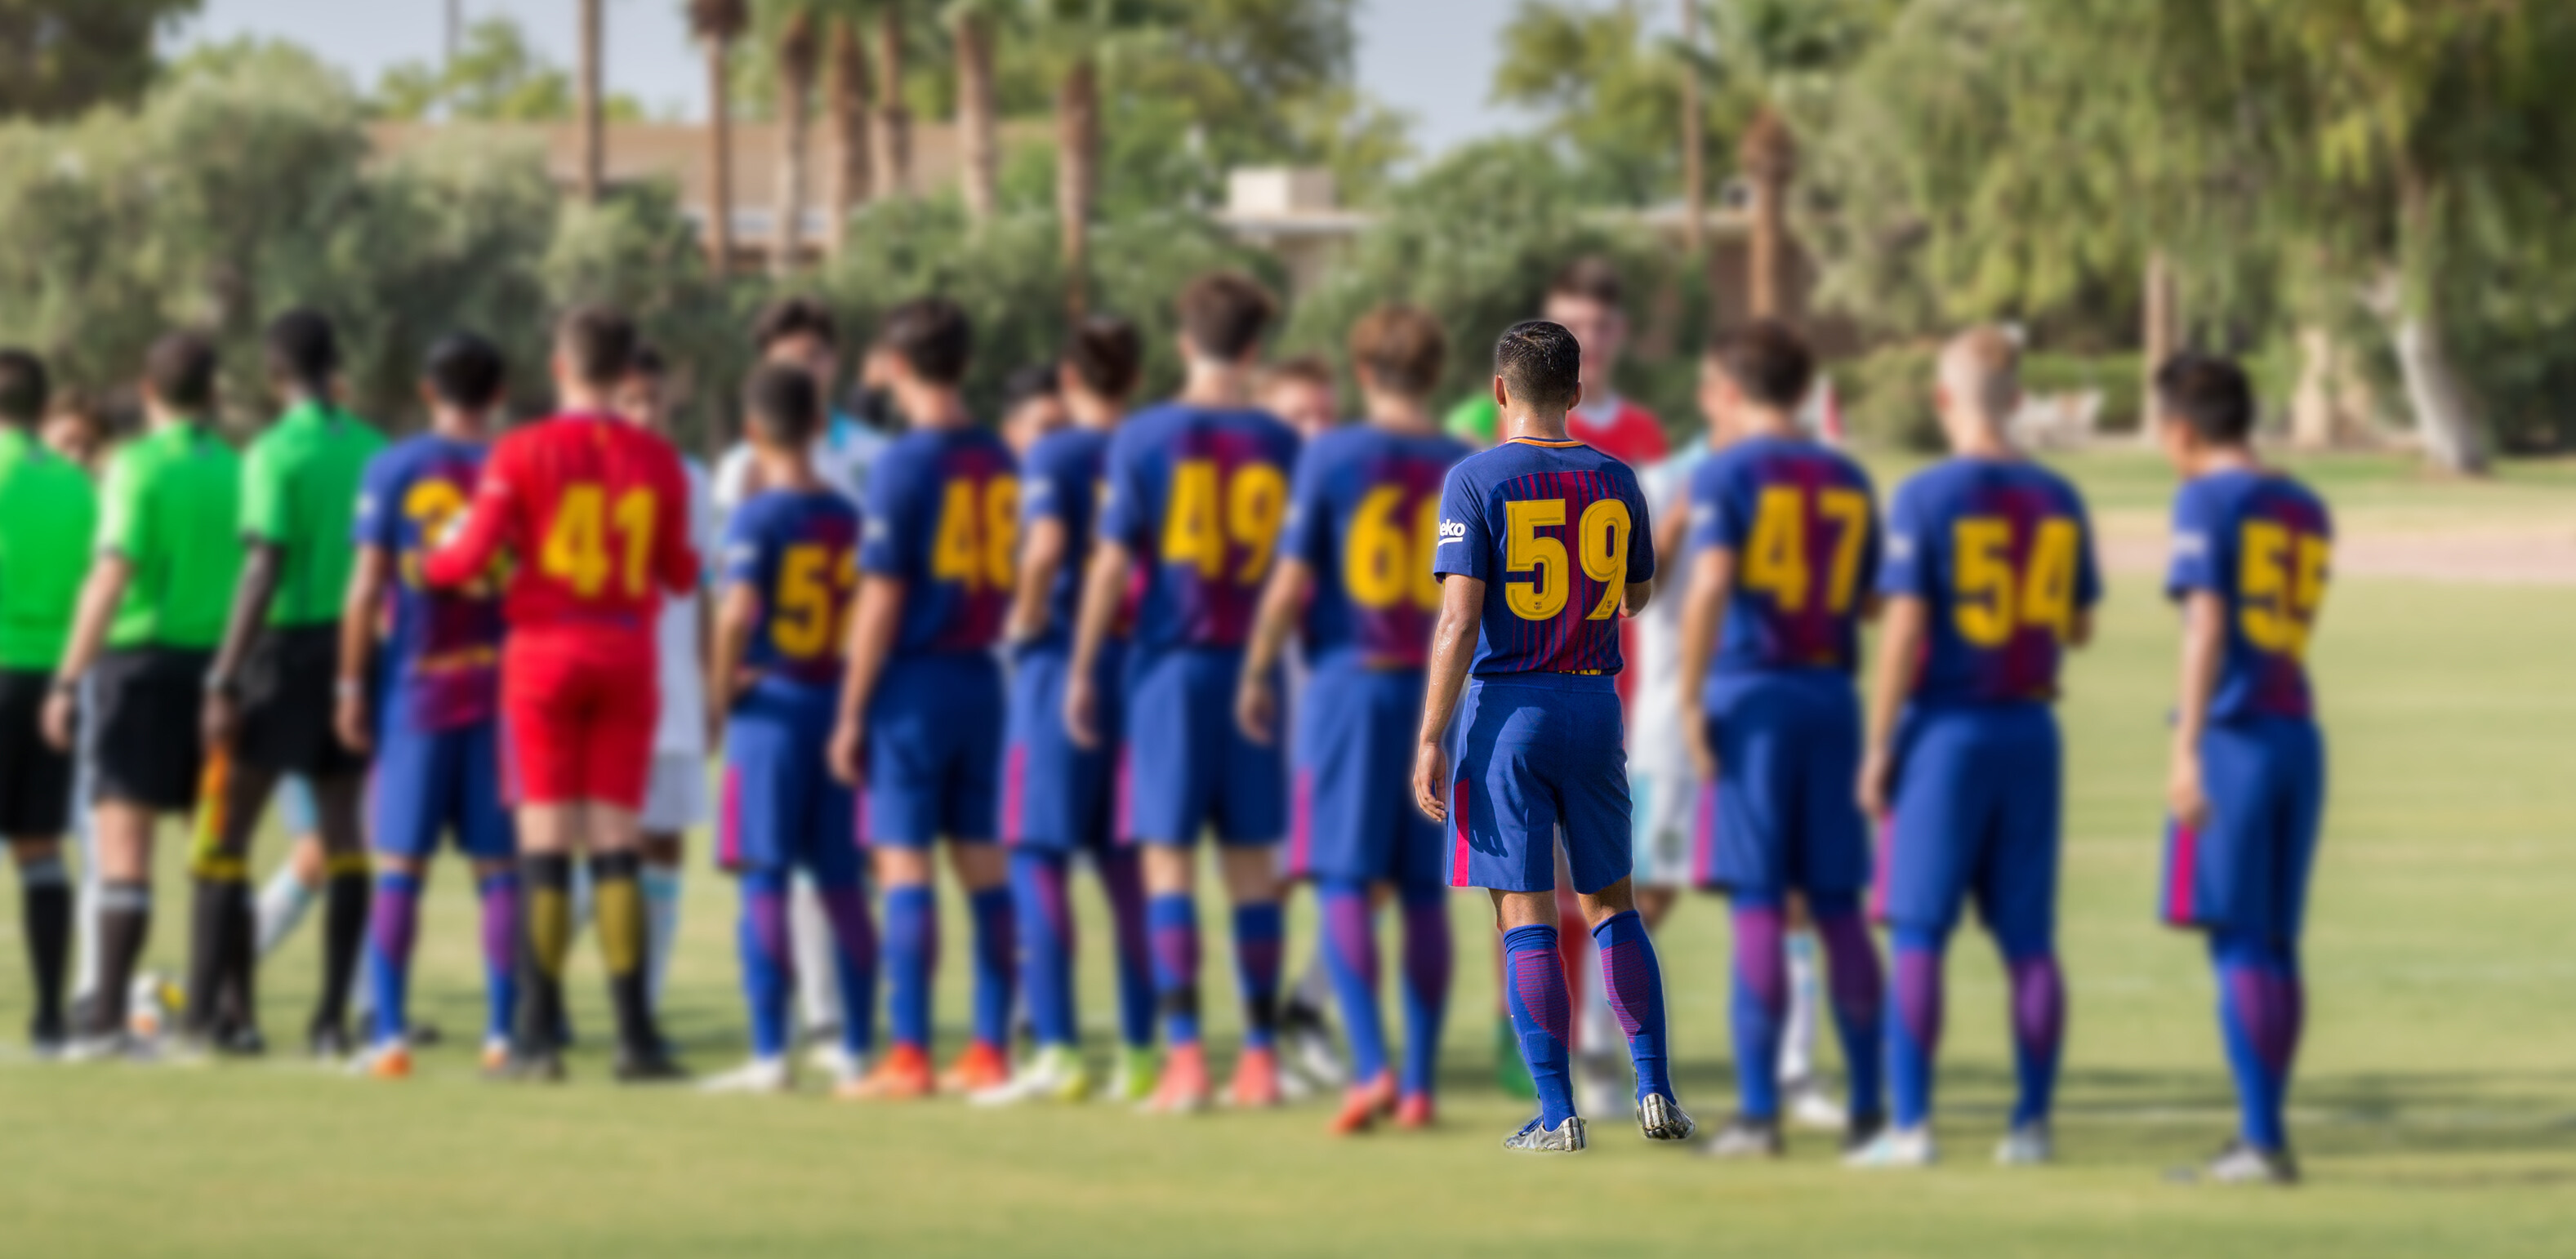 (Barça Academy Player Insider) Barça Academy soccer player, Jose Olmos, and teammates shaking opponents hand after a game at Grande Sports World